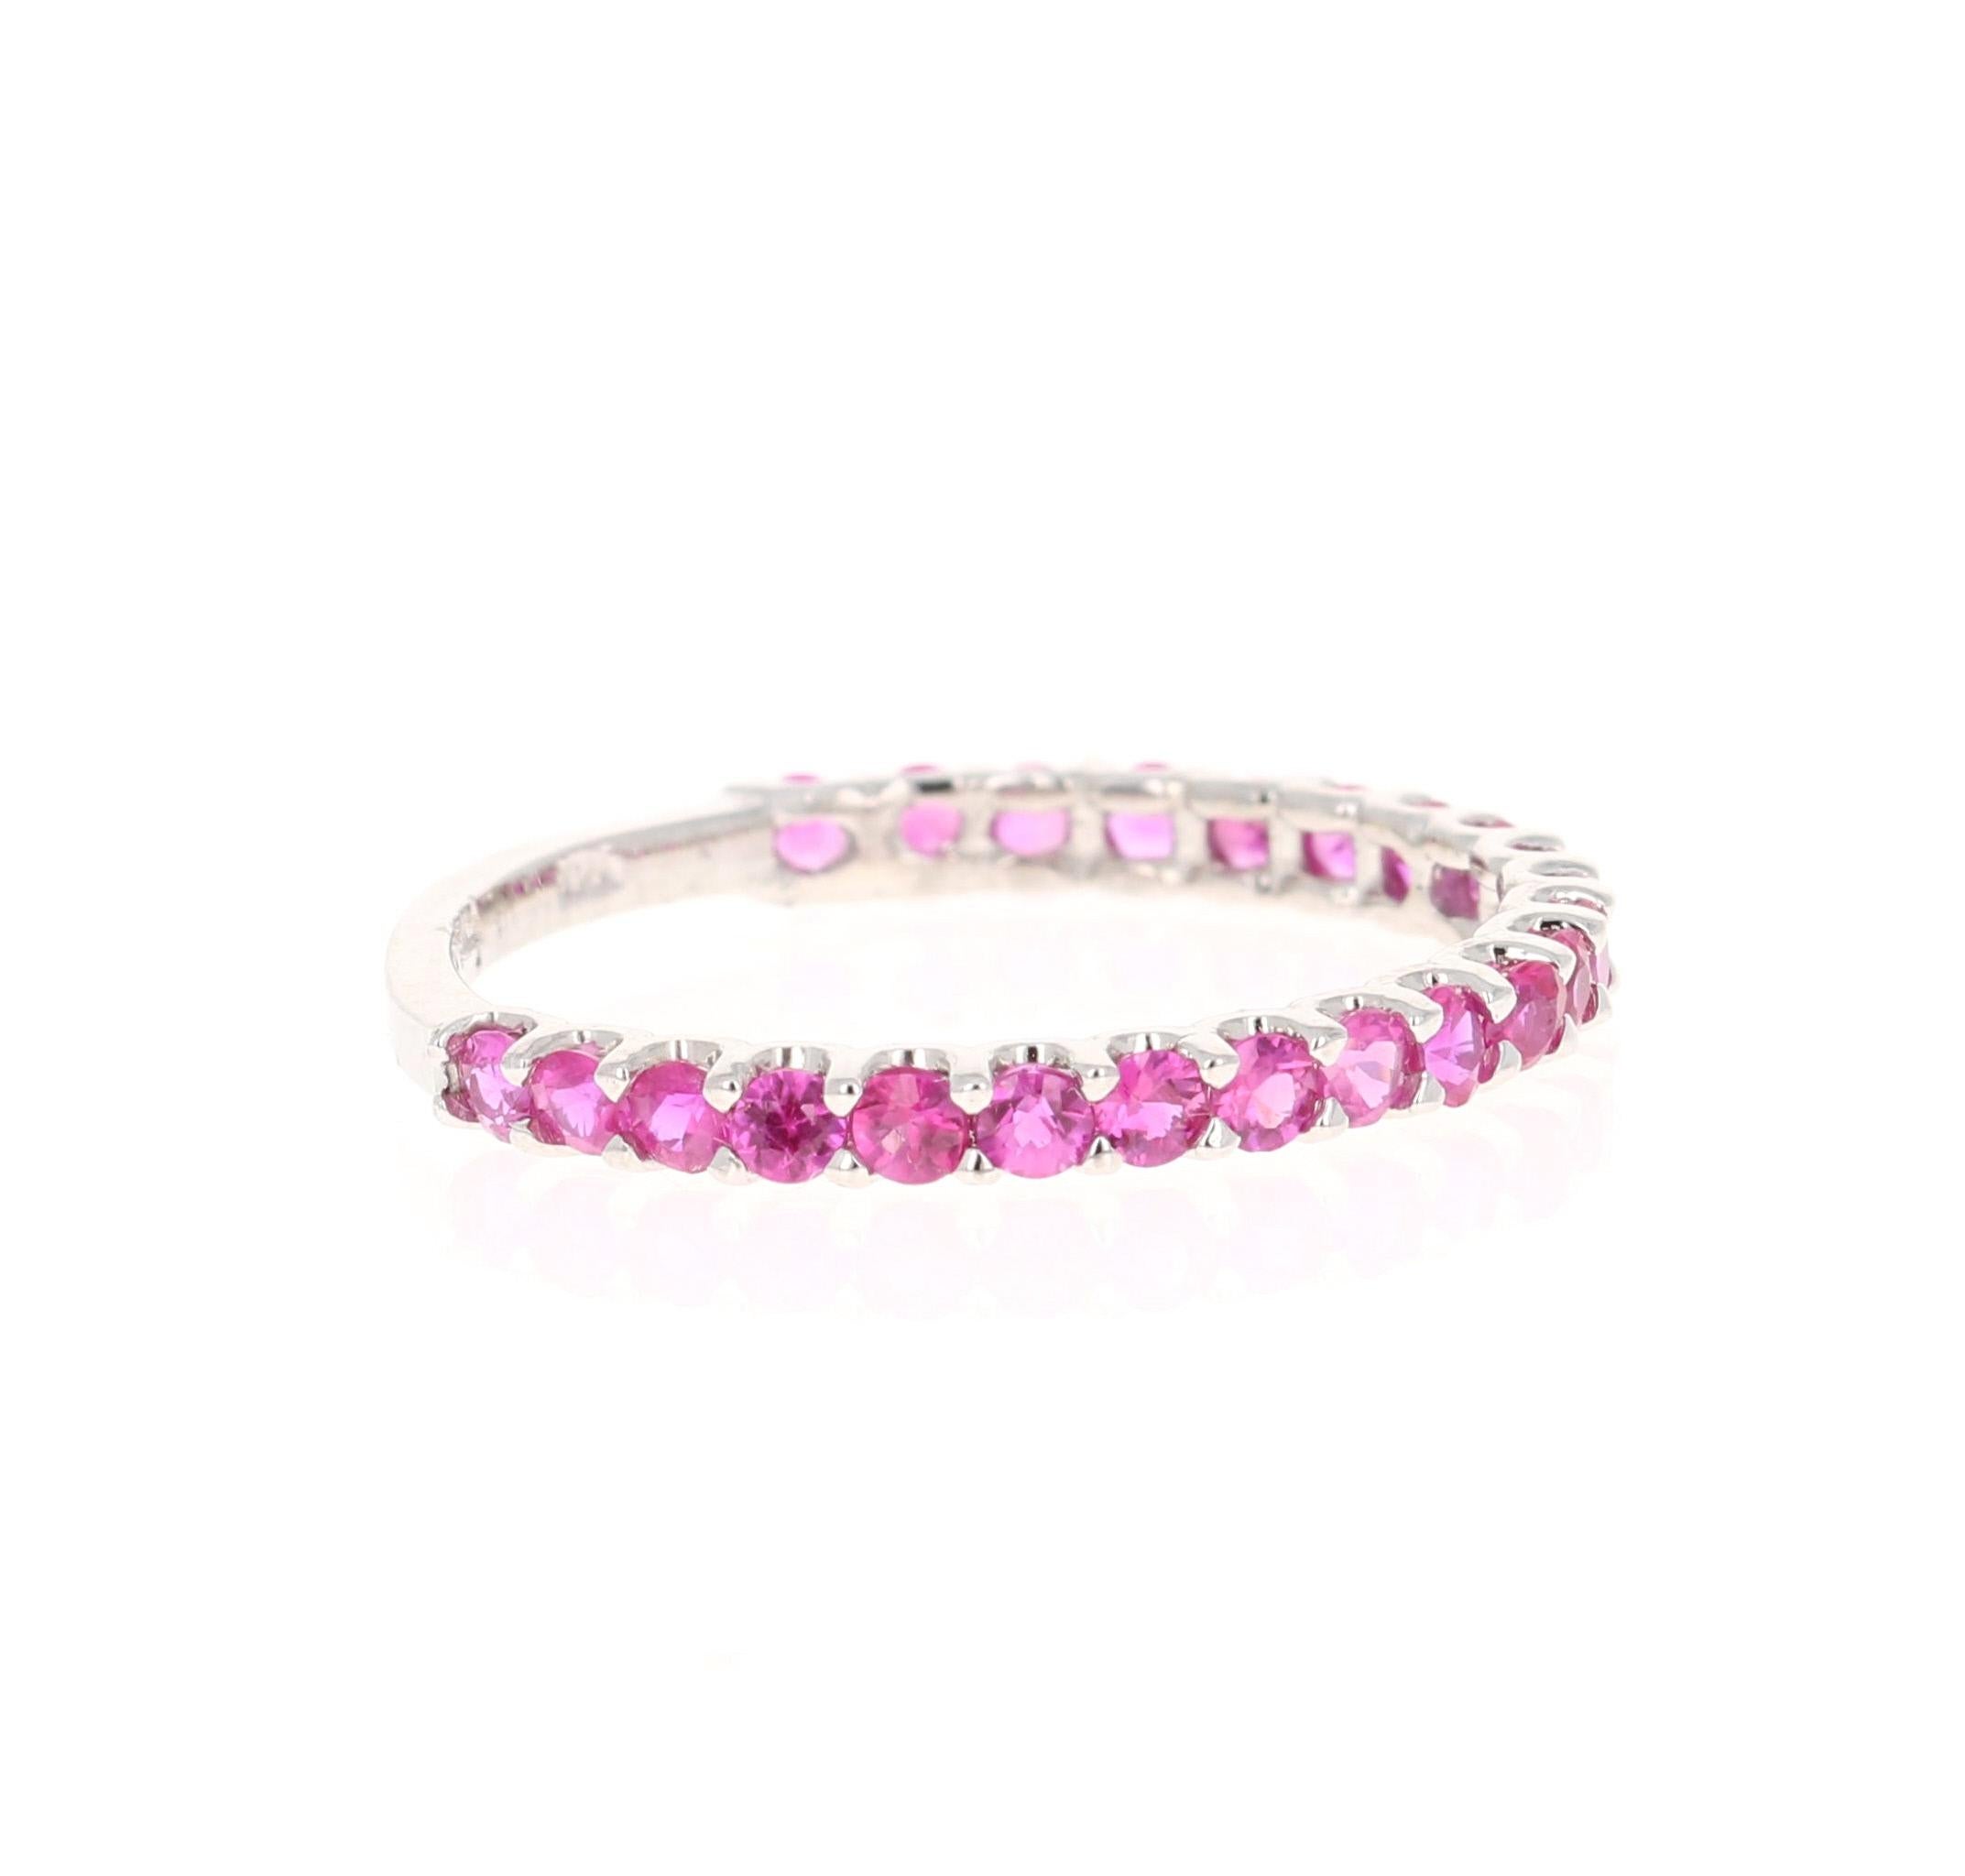 This ring has 23 Natural Round Cut Dark Pink Sapphires that weigh 0.87 Carats. 

Crafted in 14 Karat White Gold and weighs approximately 1.3 grams 

The ring is a size 7 and can be re-sized at no additional charge!

We have this same ring available